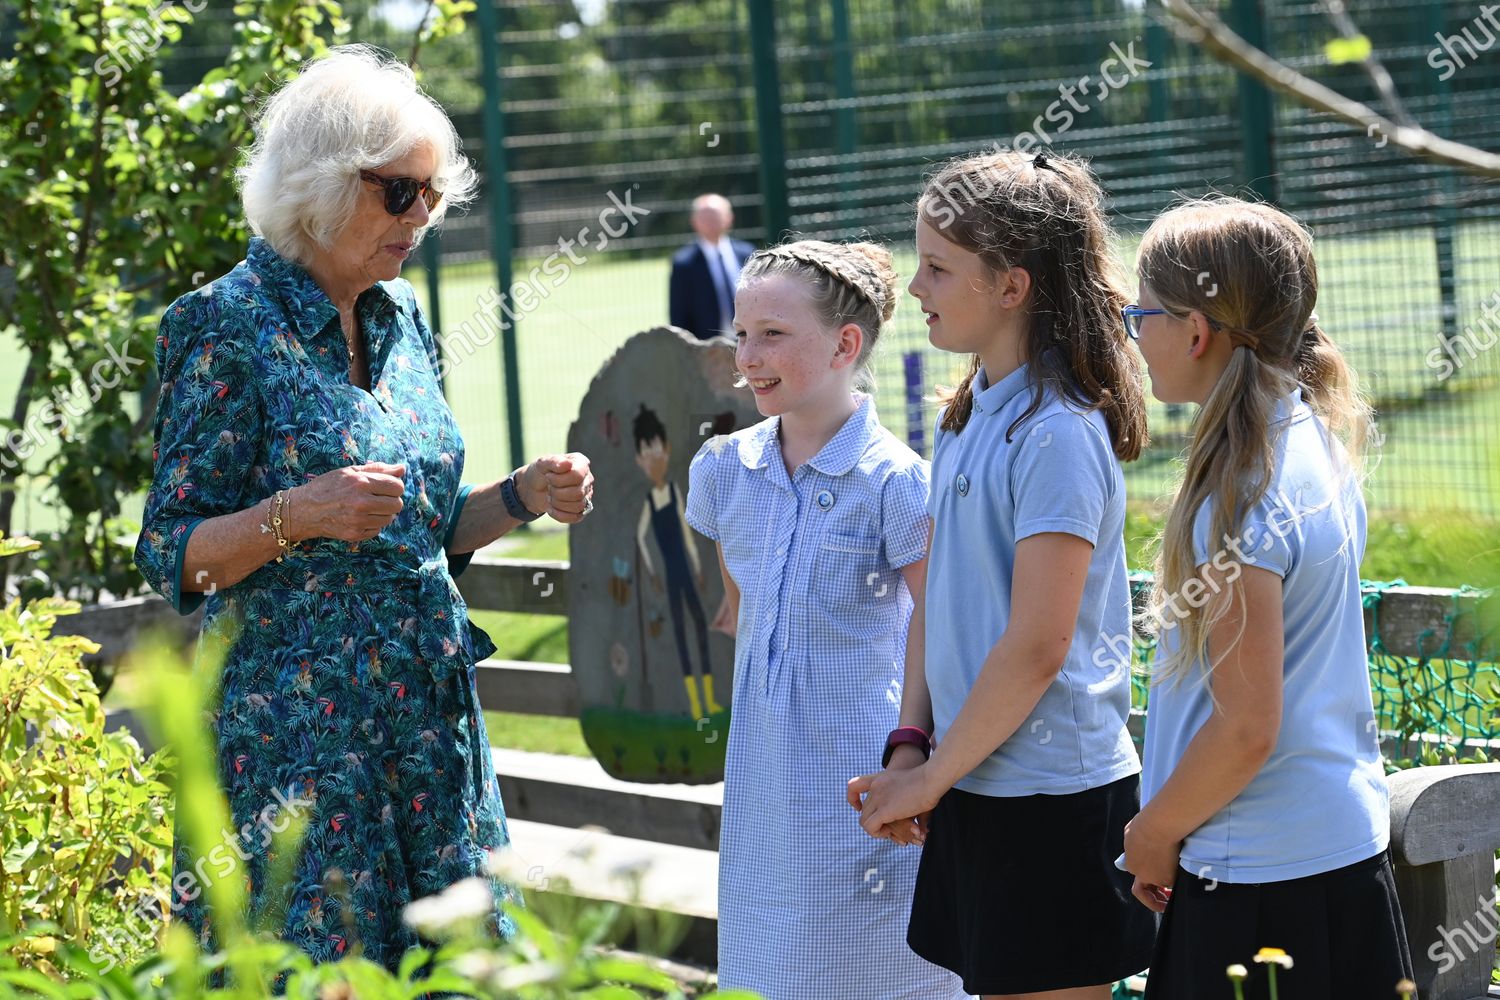 prince-charles-and-camilla-duchess-of-cornwall-visit-to-devon-and-cornwall-day-2-uk-shutterstock-editorial-12222608p.jpg